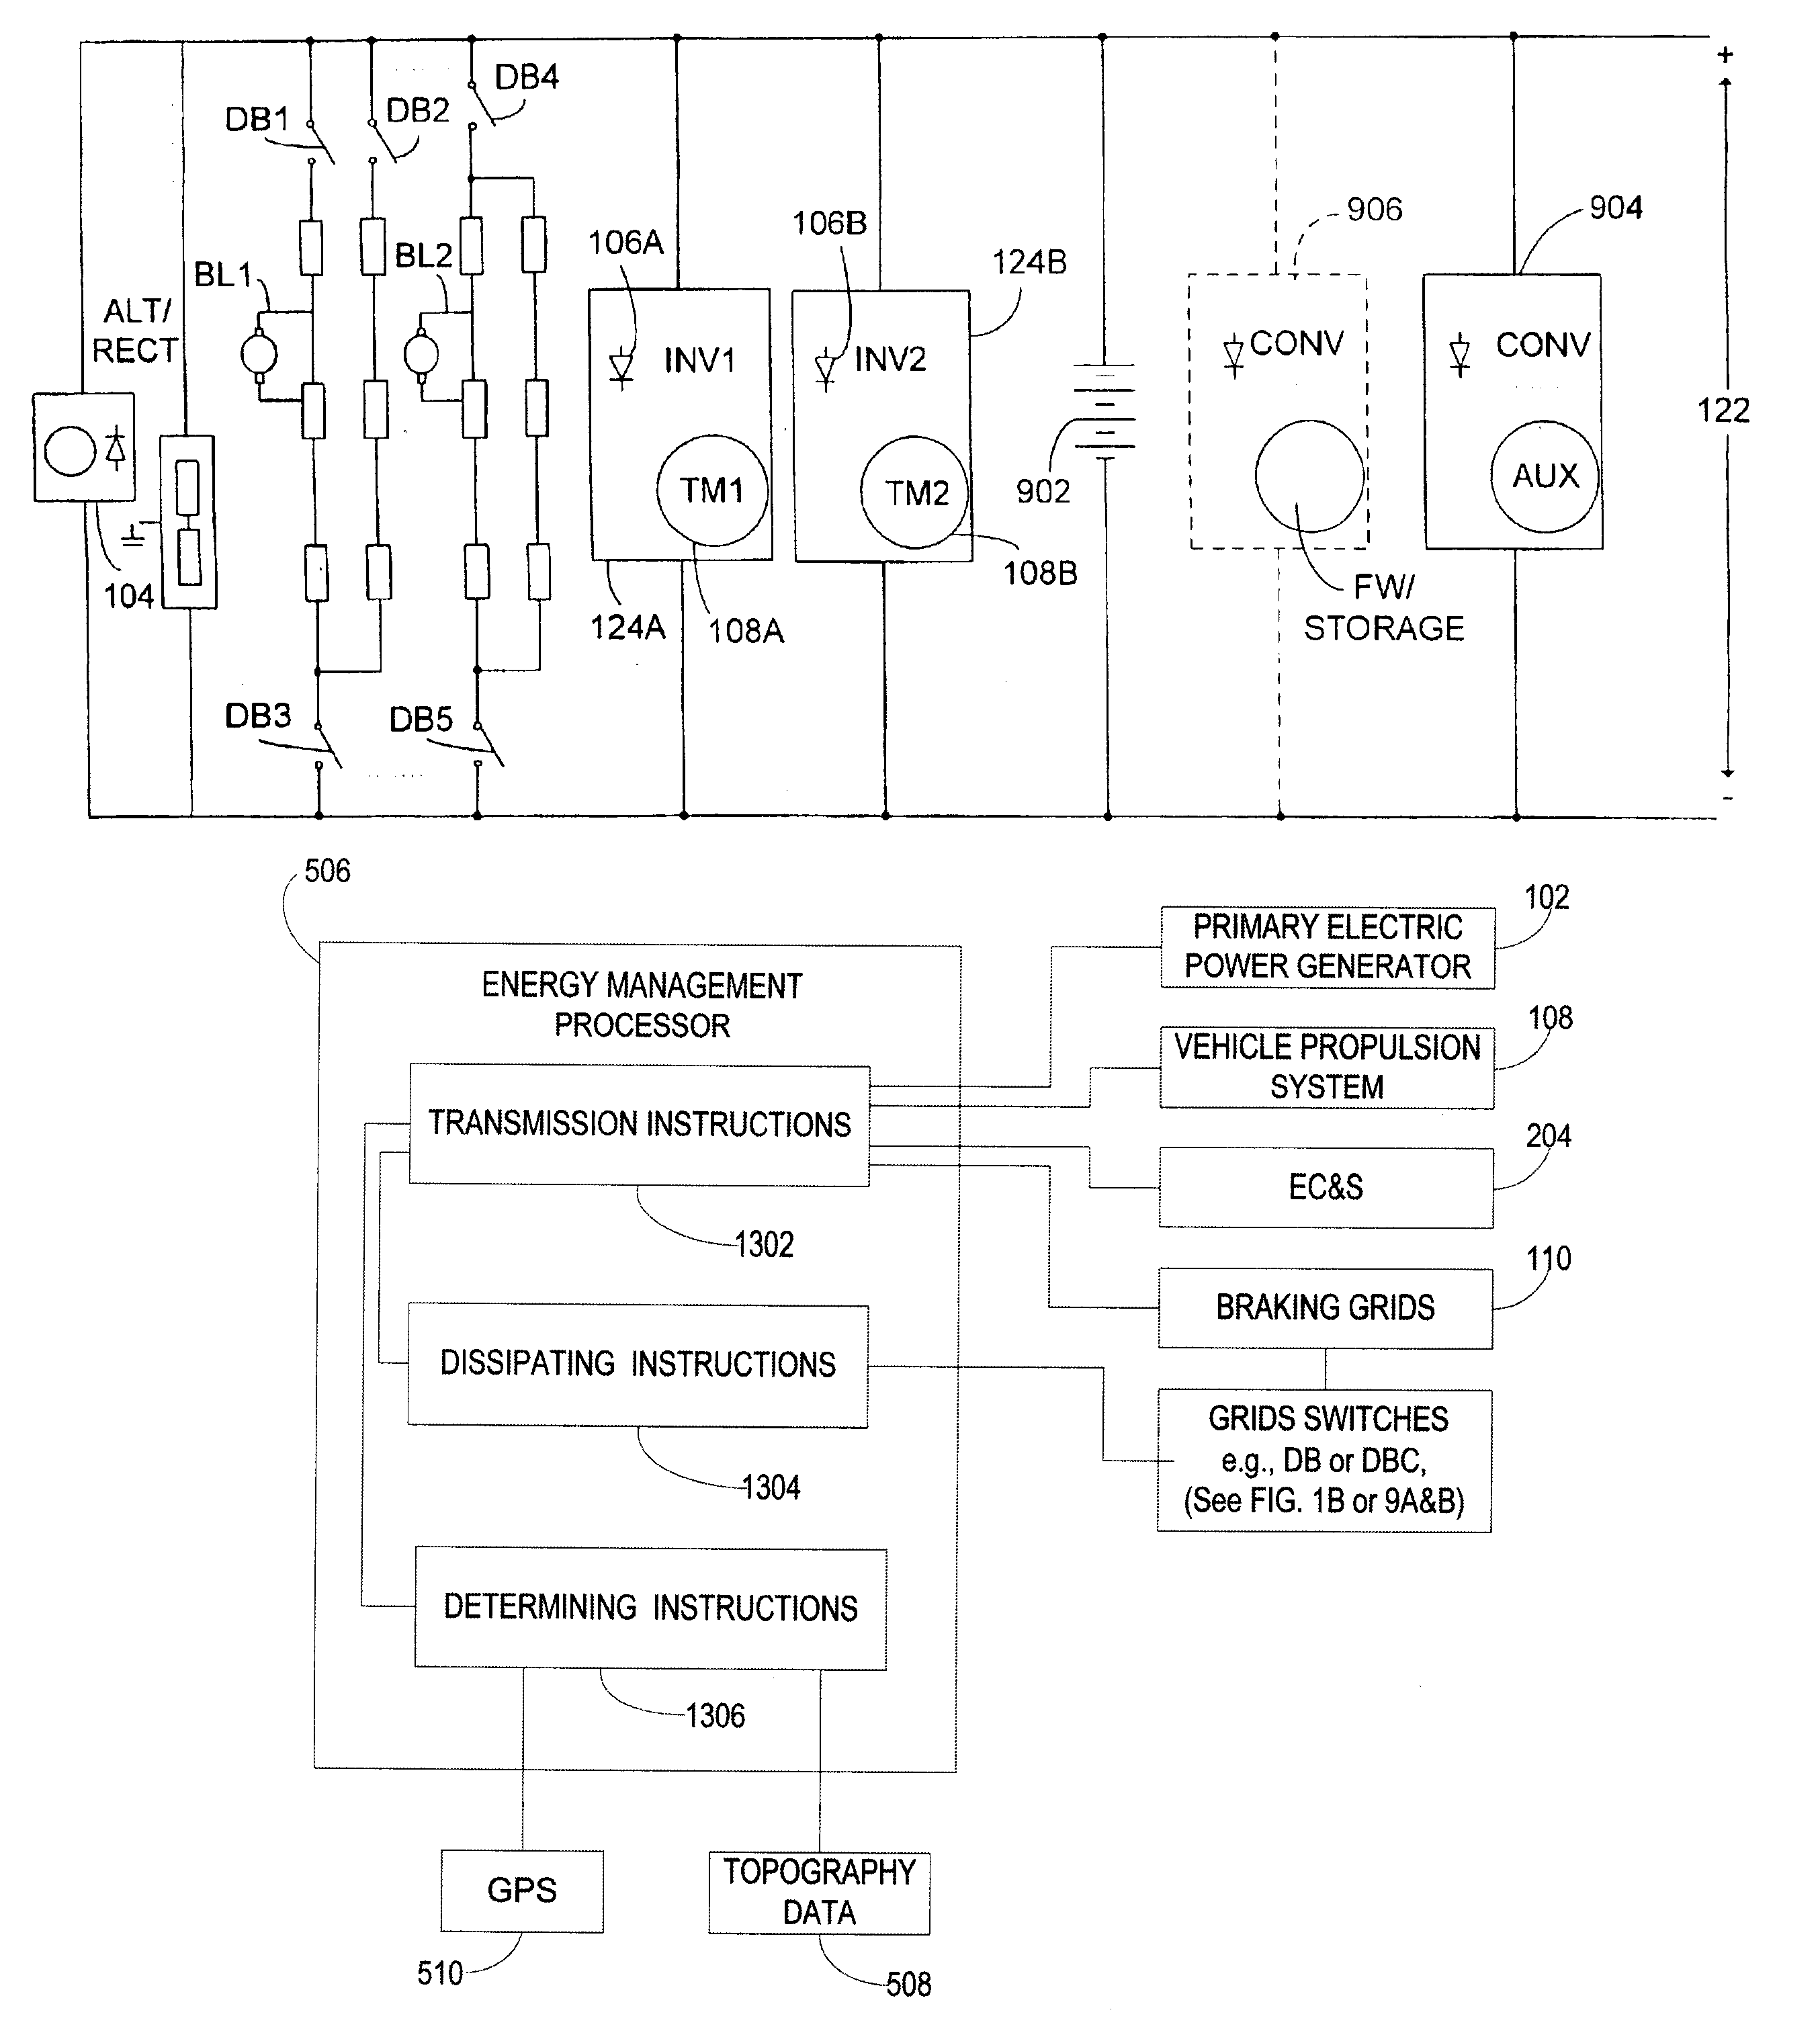 Hybrid energy off highway vehicle electric power storage system and method